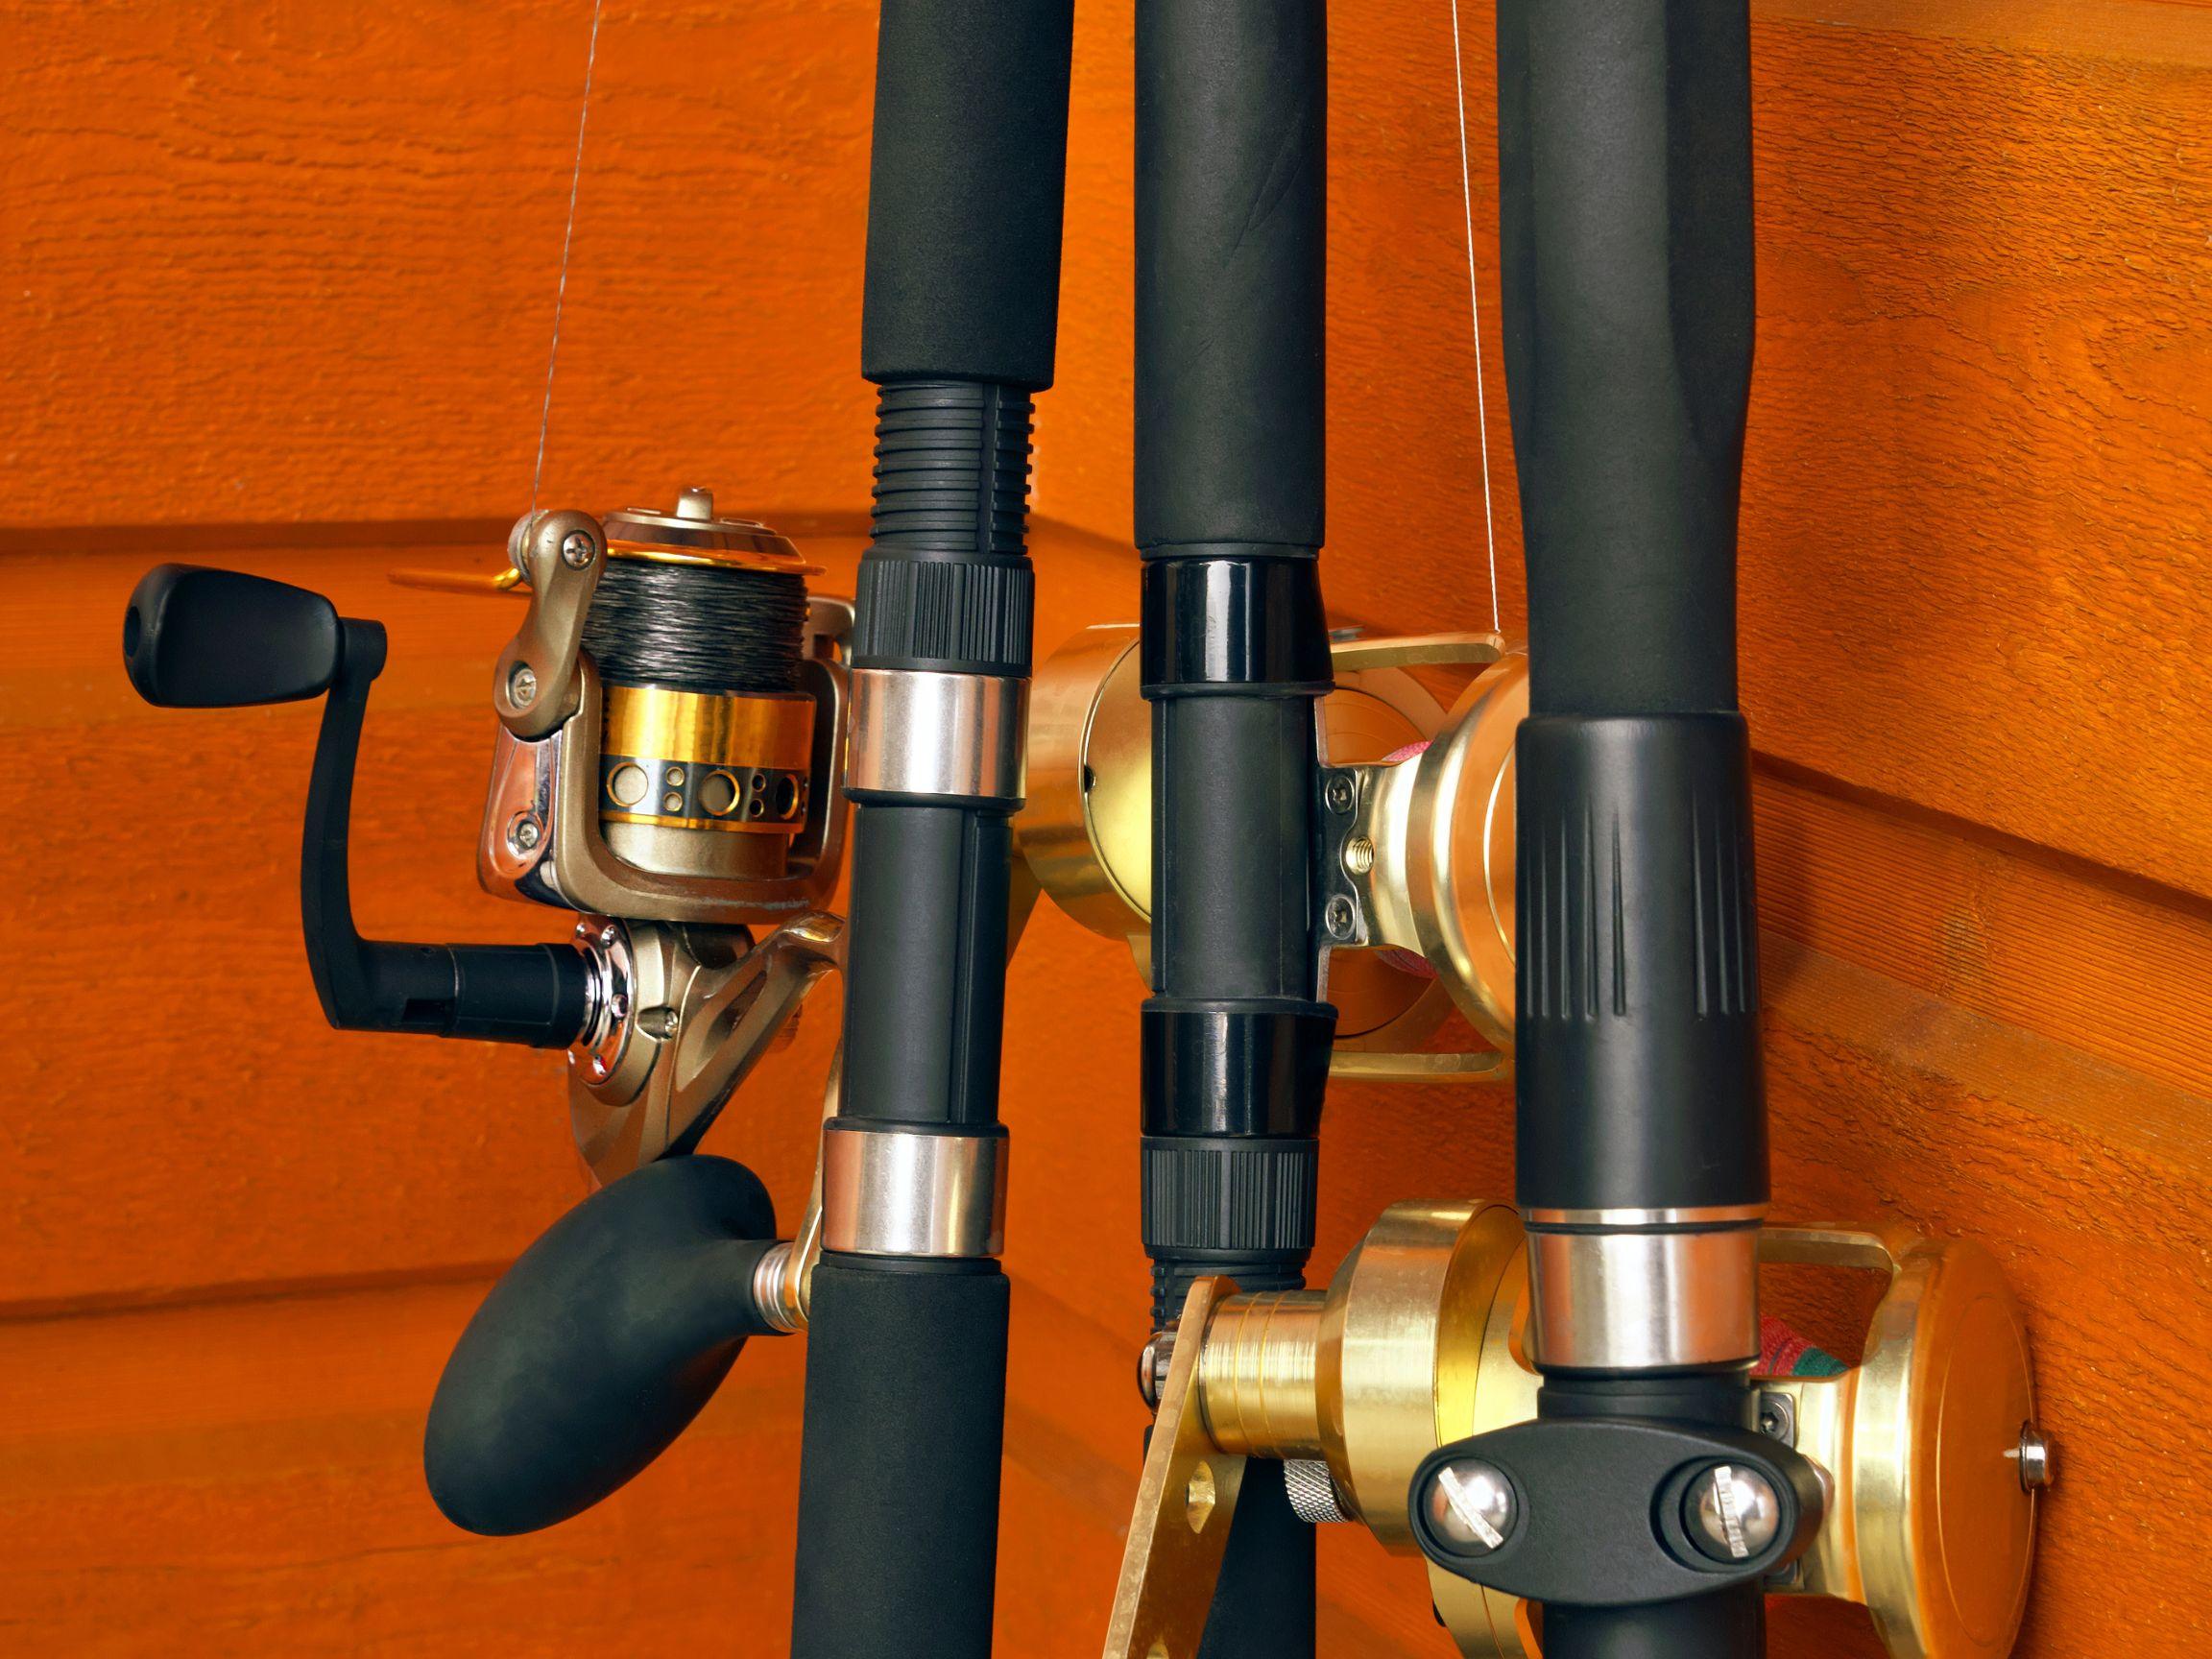 Spinning Rod vs Casting Rod: Which one is Better?